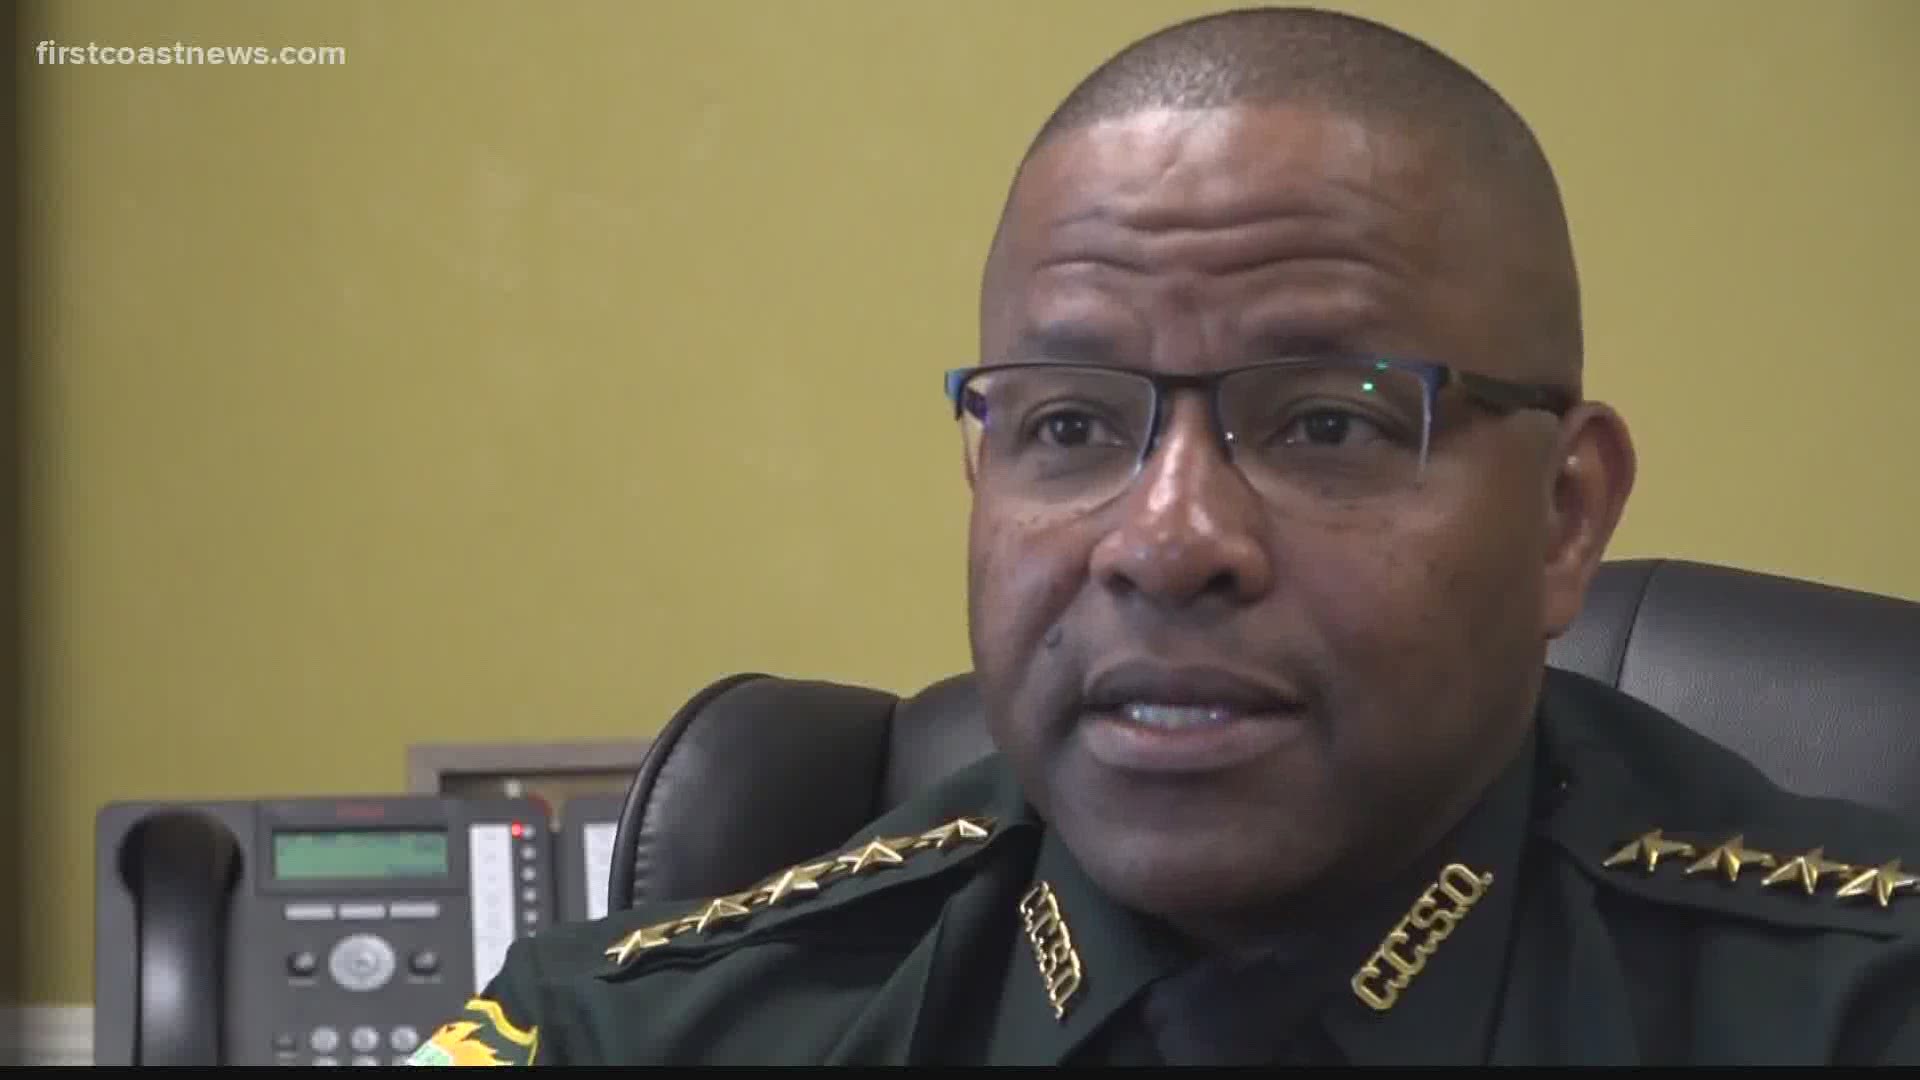 The Clay County Sheriff race has been in the spotlight due to former Sheriff Darryl Daniels' recent arrest. The St. Johns County Sheriff's race is also heated.